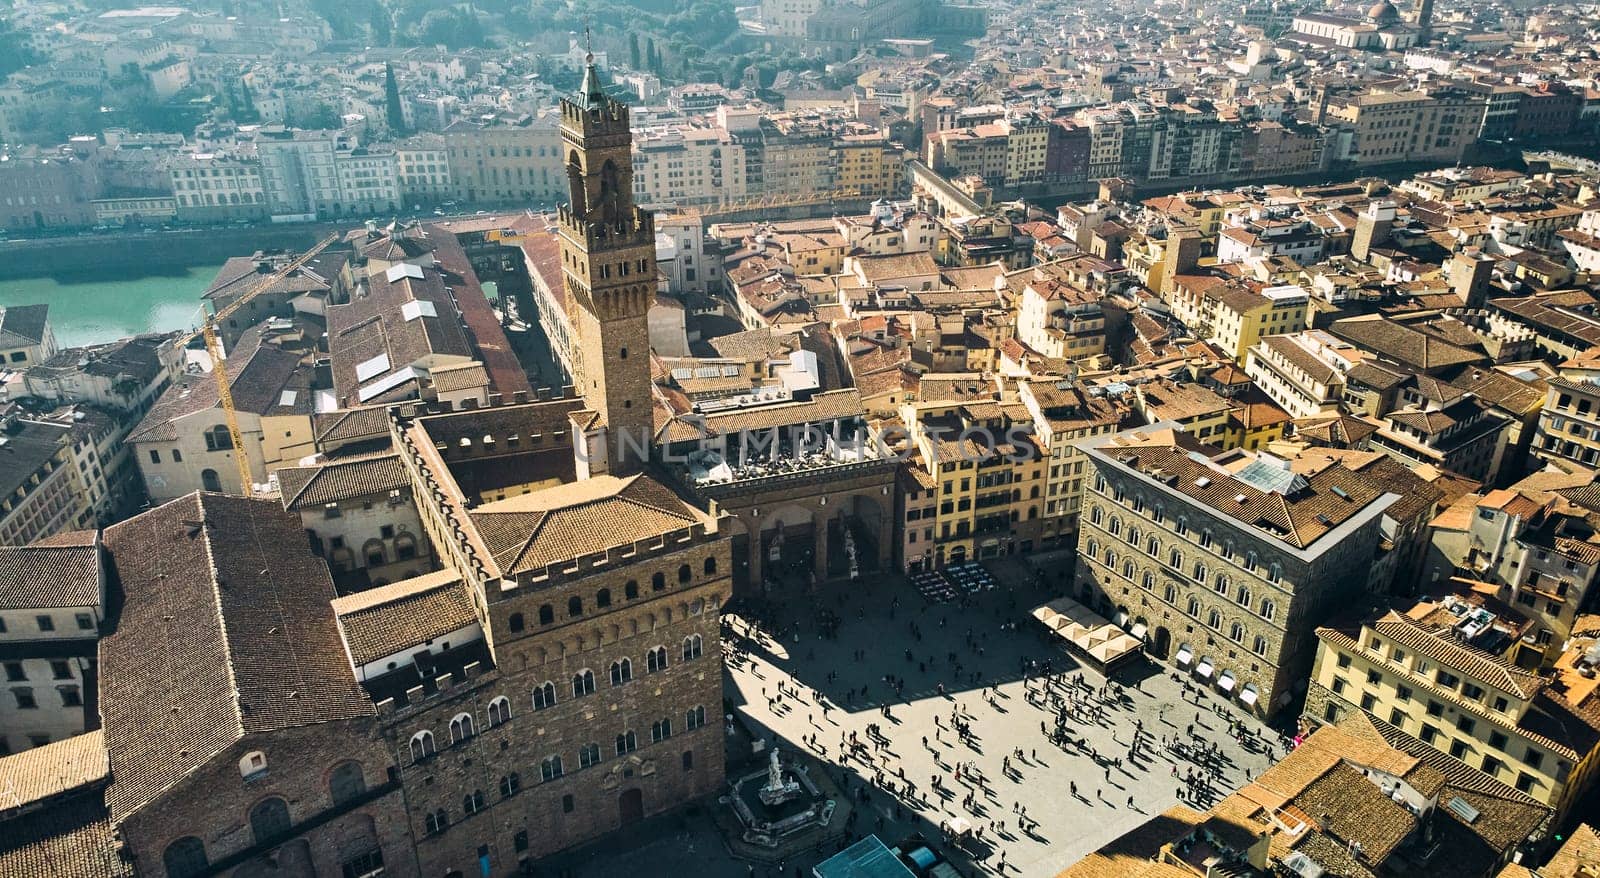 Aerial view of famous tower and Palazzo Vecchio square and Florence cityscape, Italy by driver-s